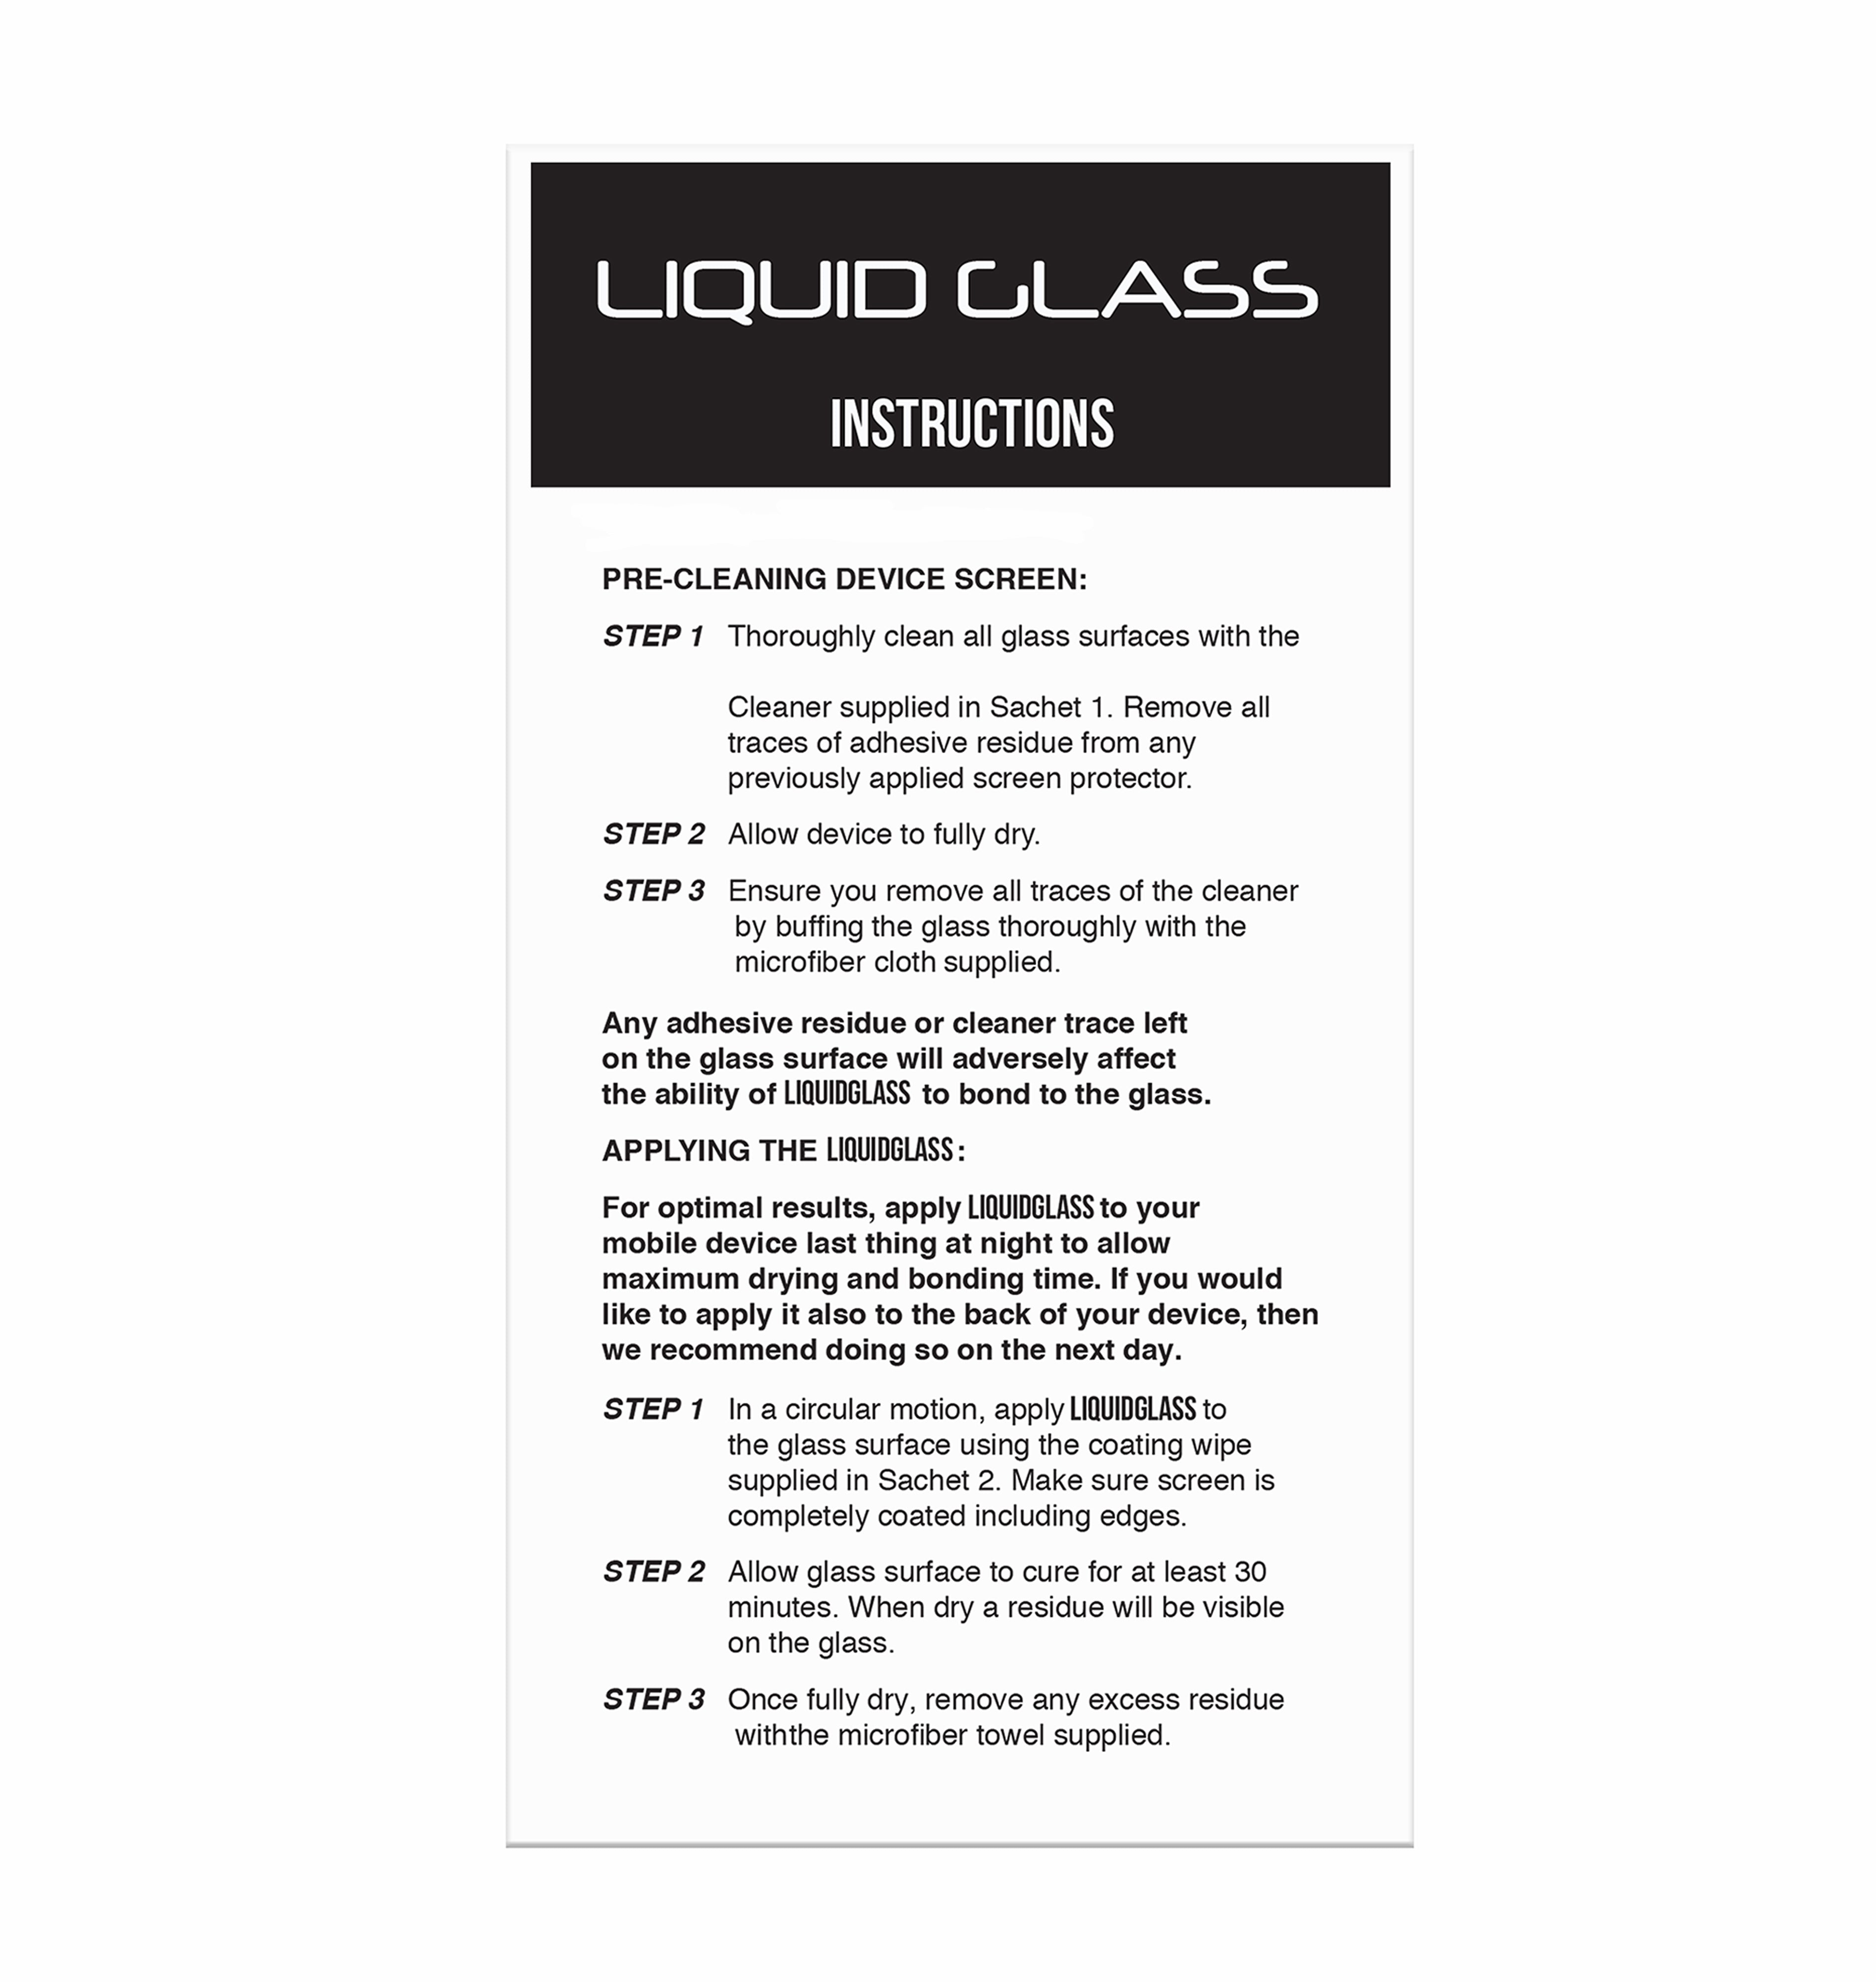 Liquid Glass Screen Protector for Apple Watch All Series